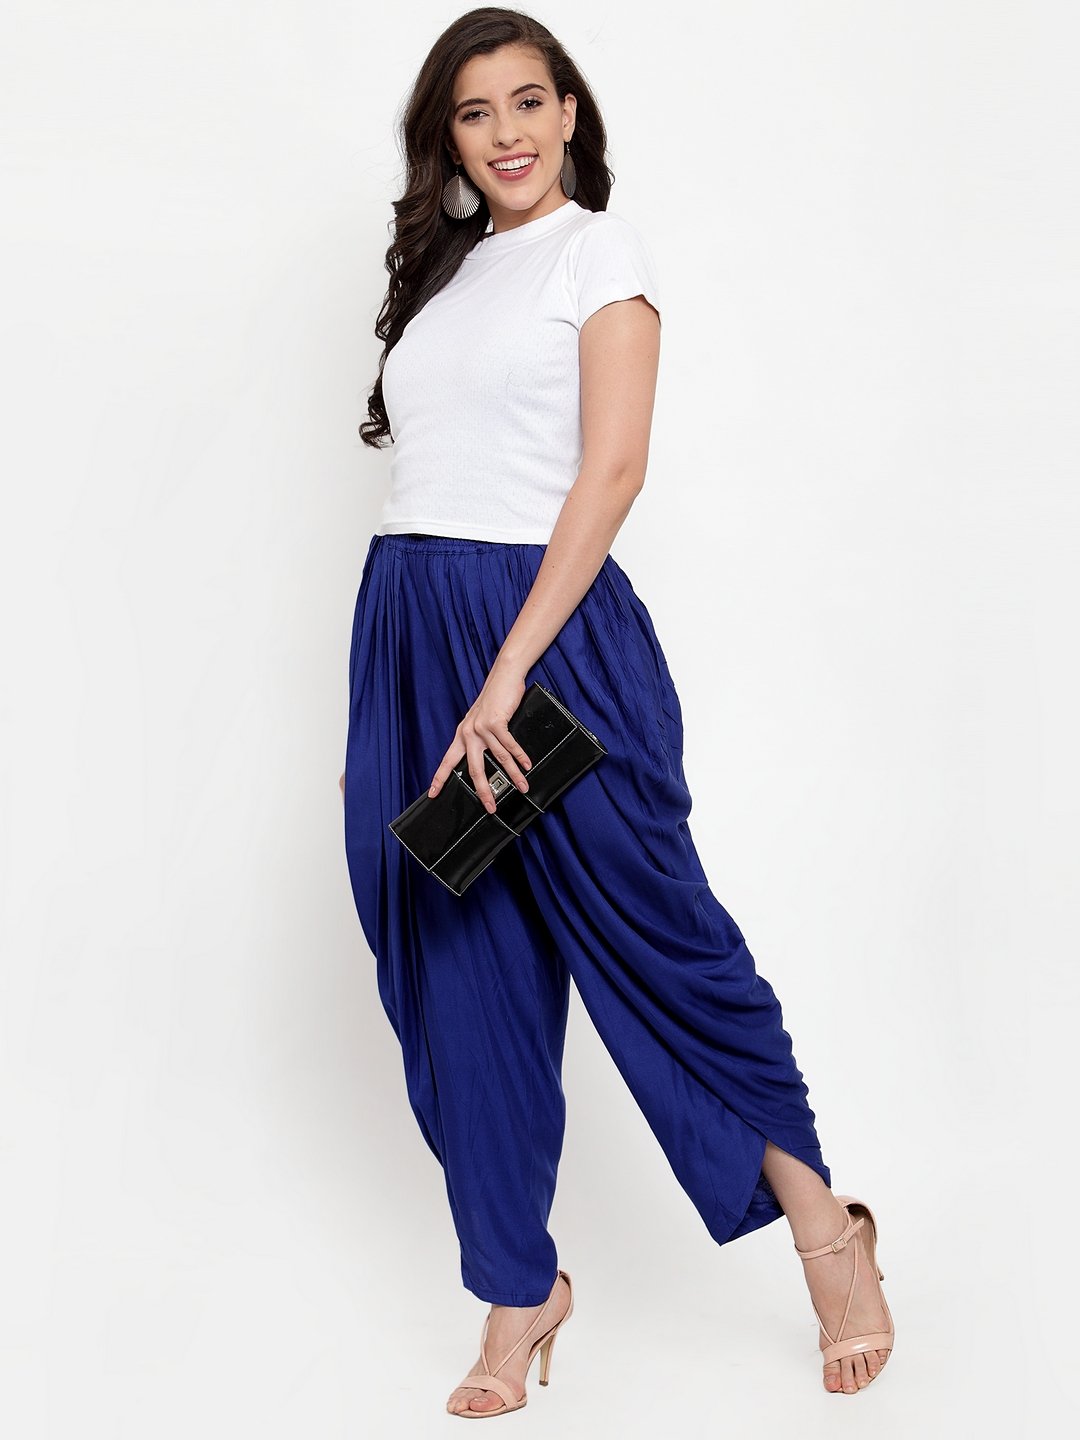 Women's Royal Blue Solid Dhoti - Jompers